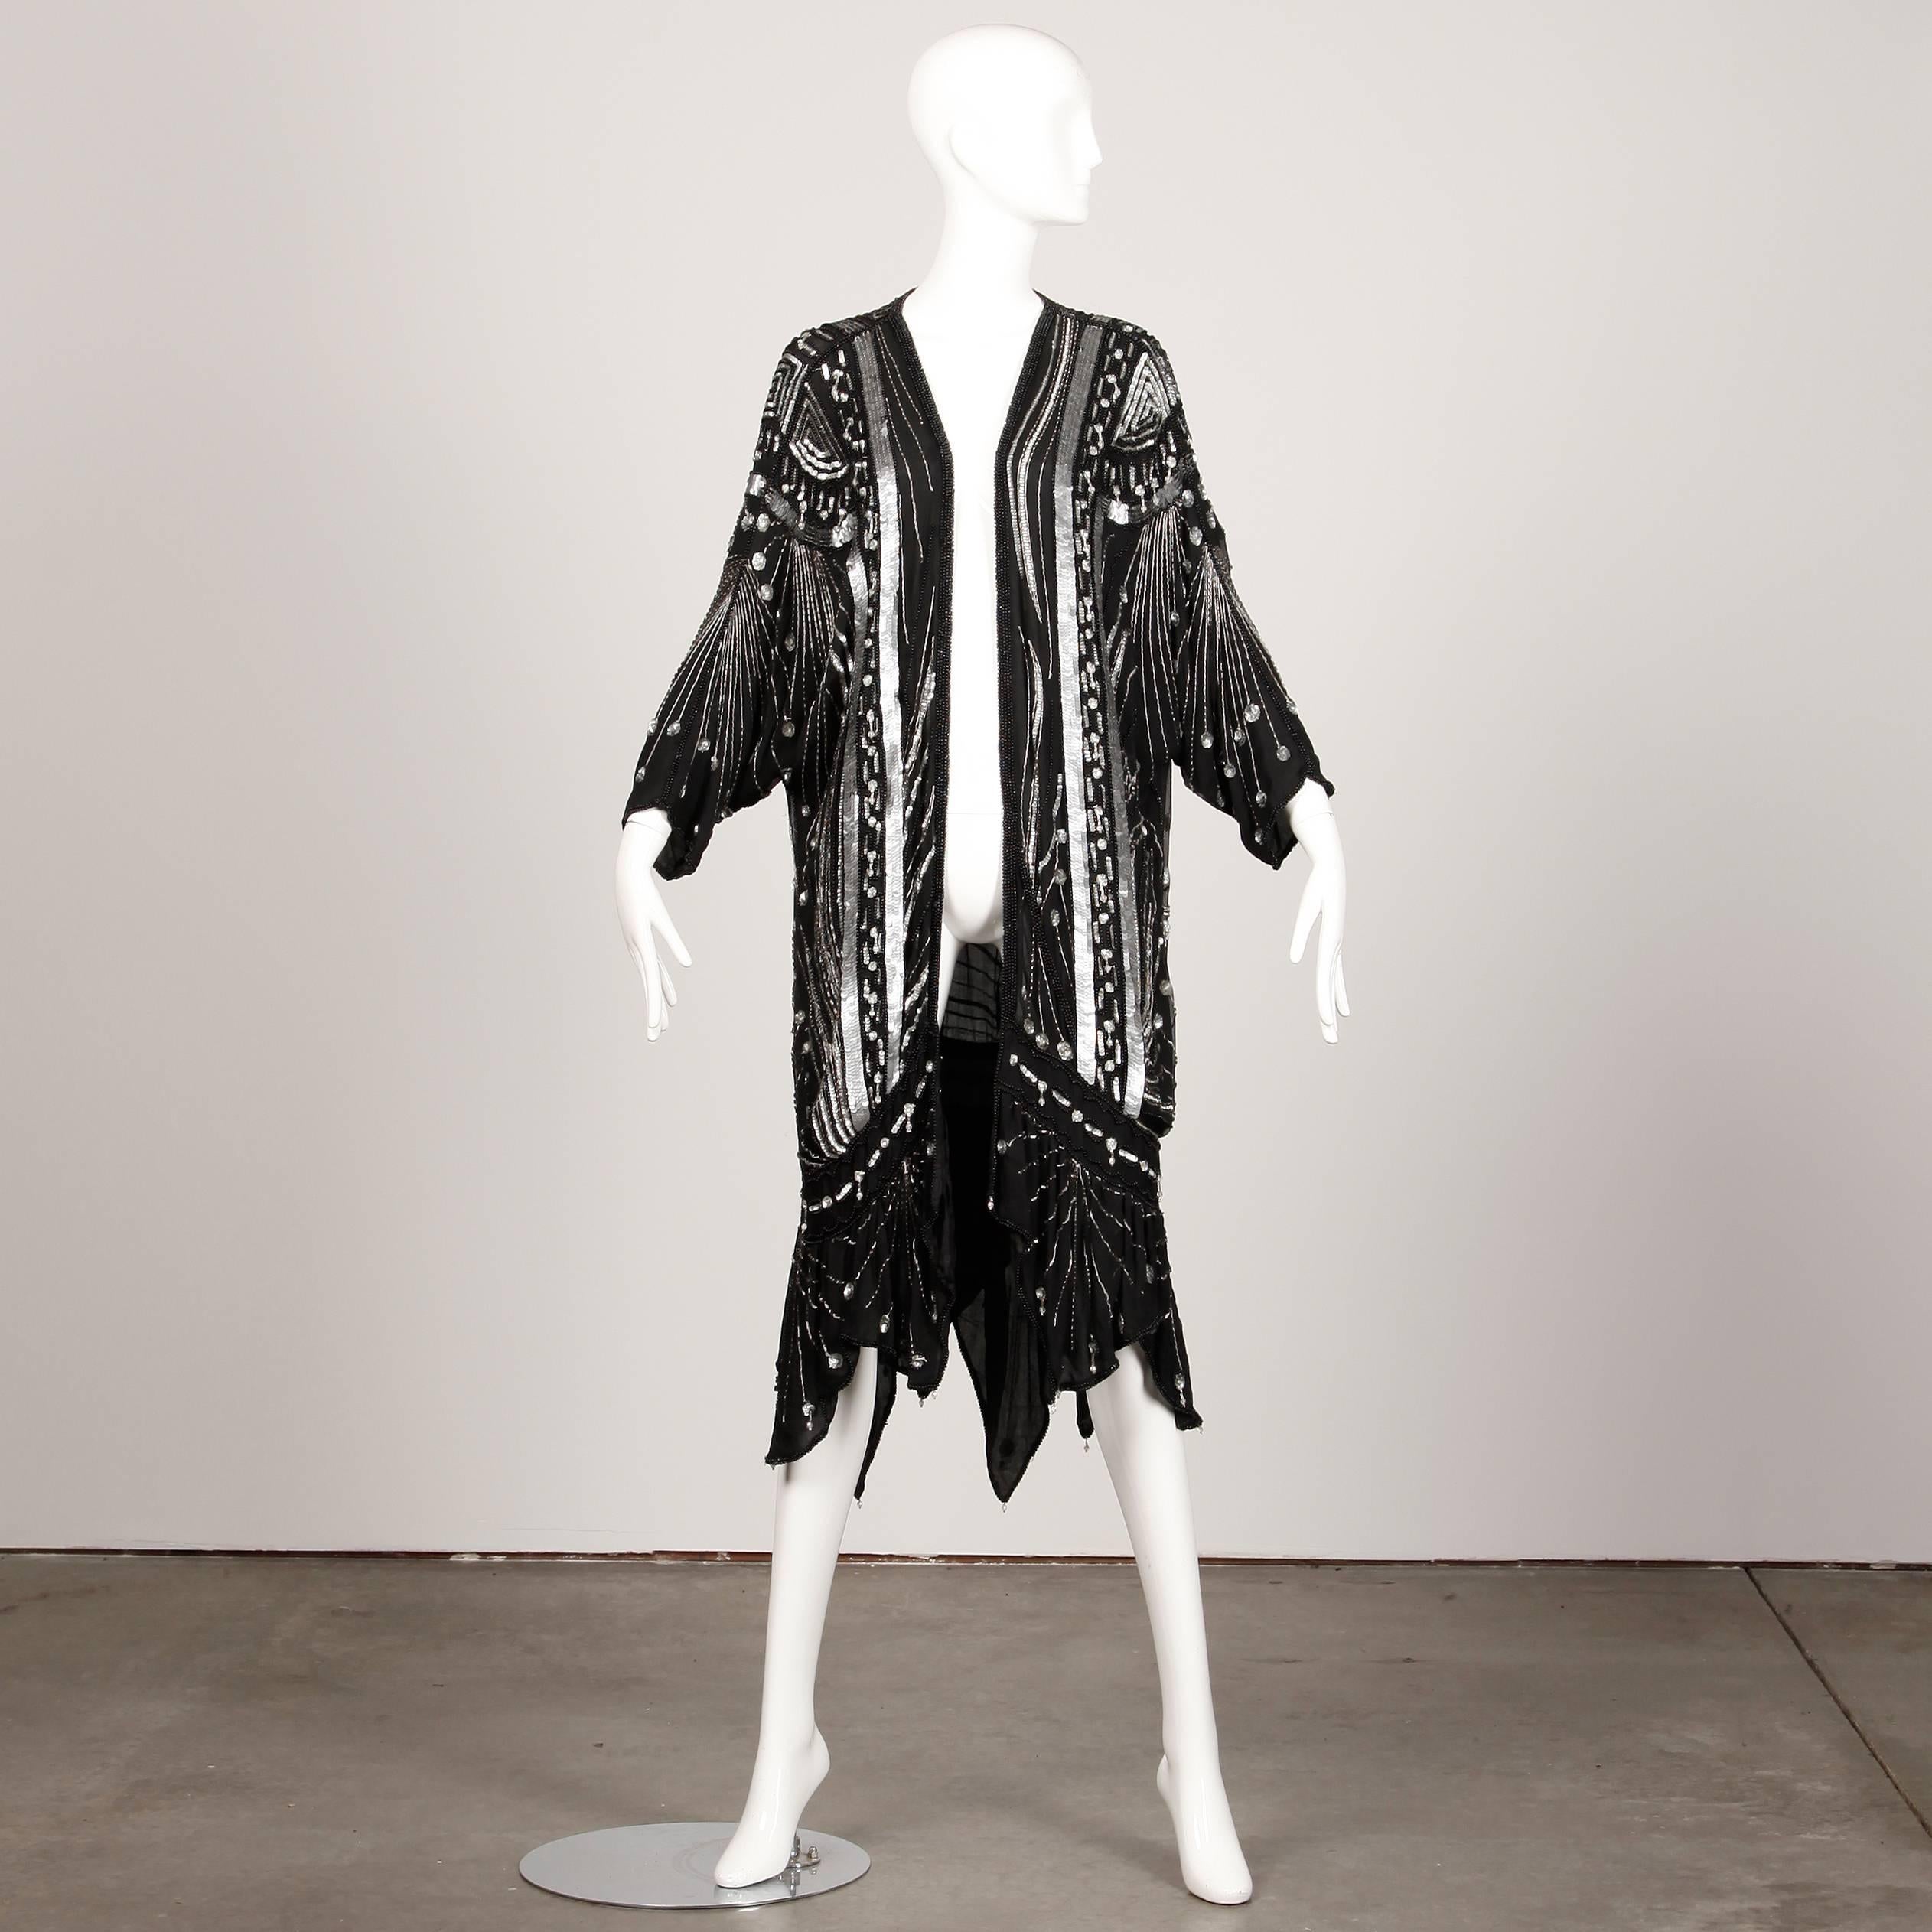 Sparkling Art Deco-inspired silk duster completely encrusted with thousands of sparkling sequins and beads. Scarf hem hits mid-calf. Fully lined in silk with front hook closure. This piece should fit most sizes on account of the oversized shape. The